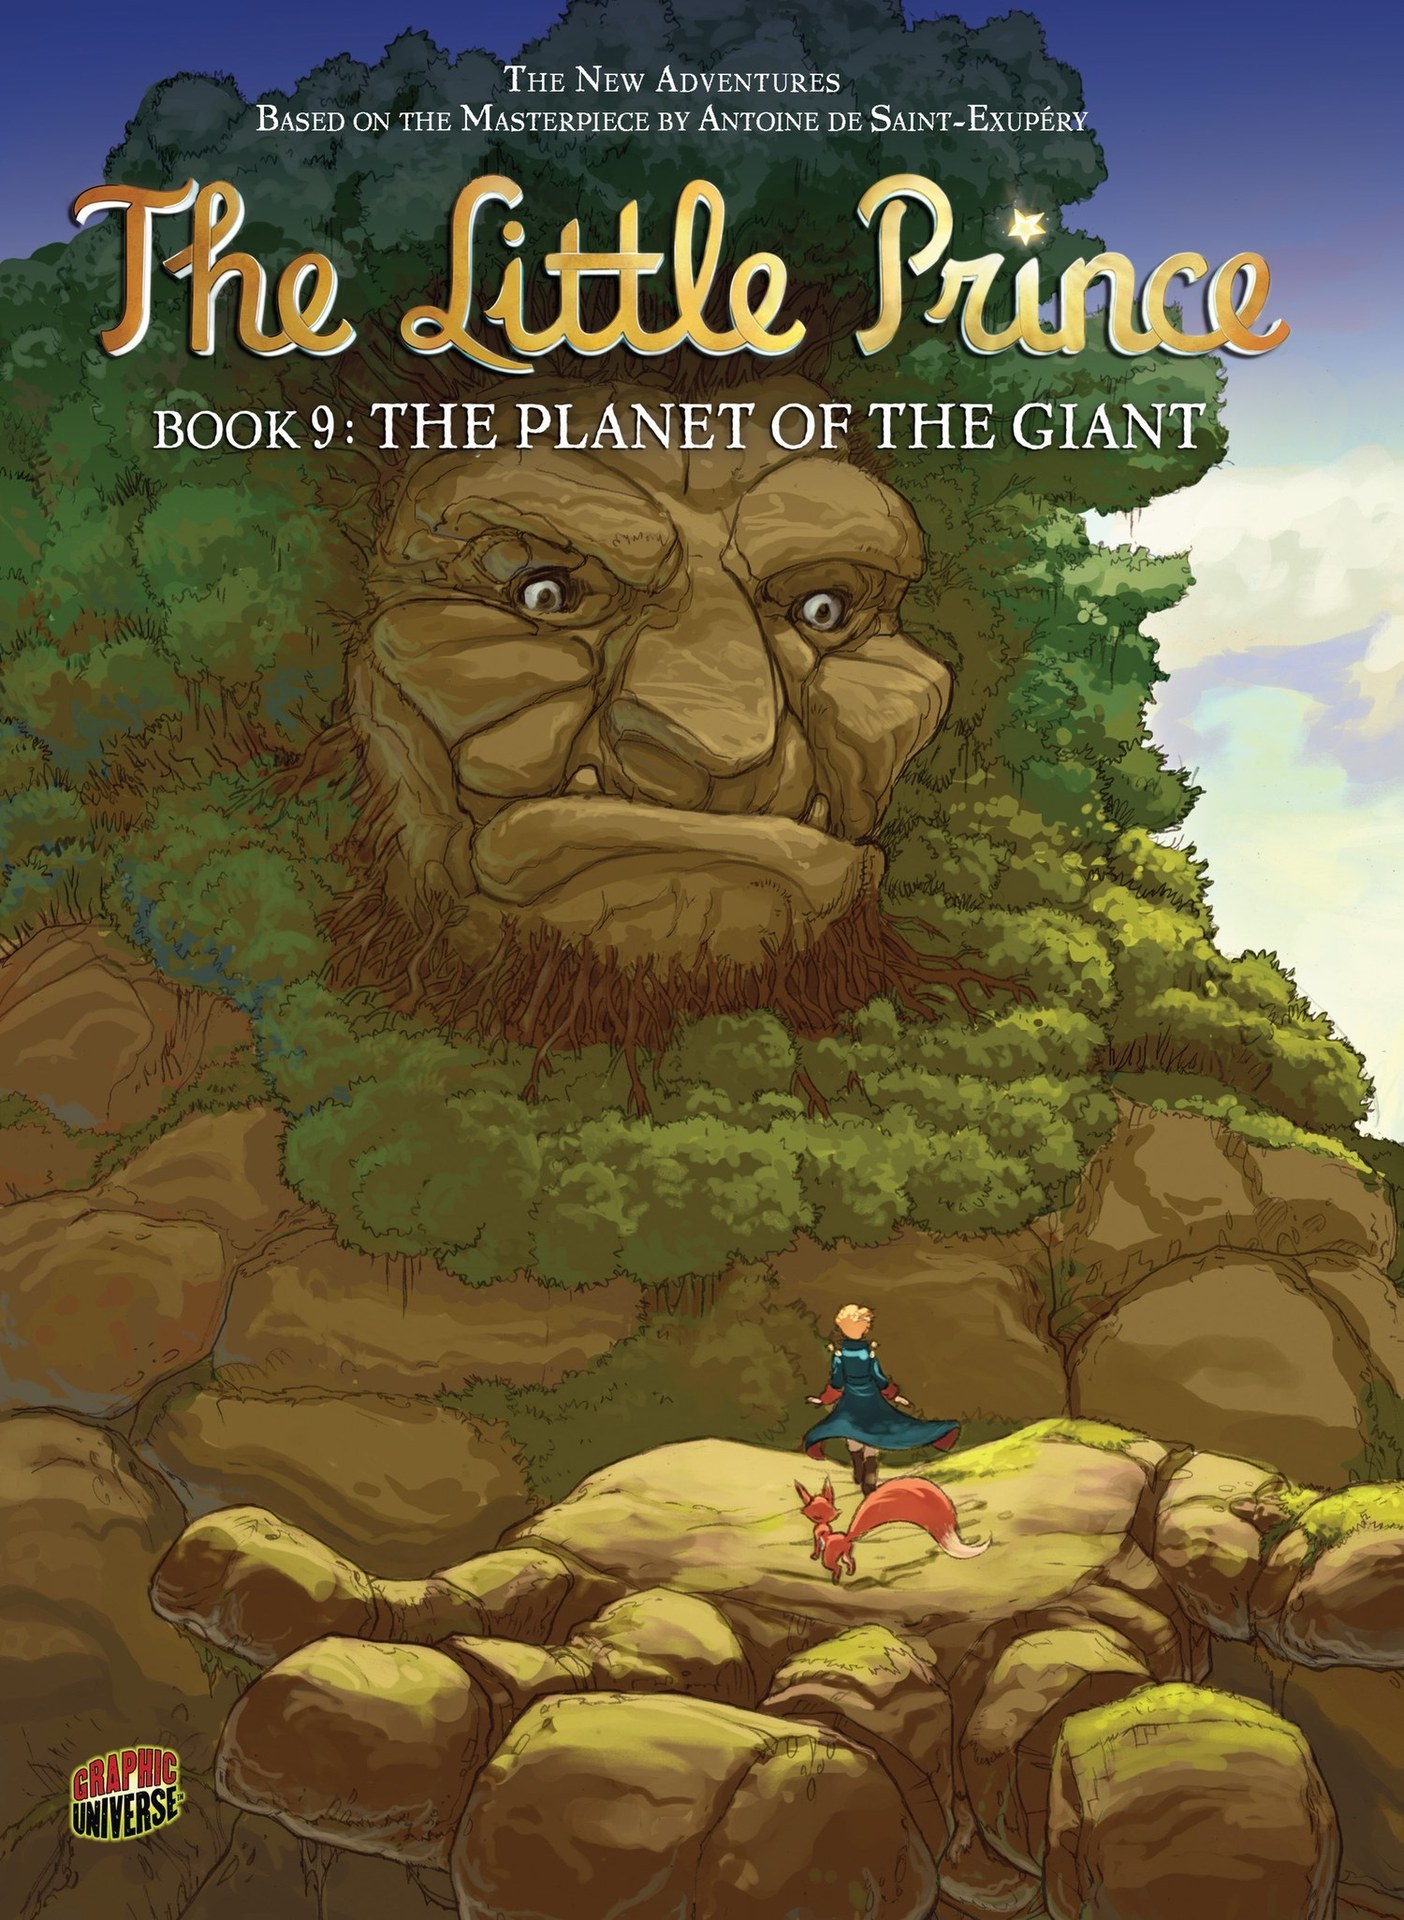 The Little Prince Issue 9 | Read The Little Prince Issue 9 comic online in  high quality. Read Full Comic online for free - Read comics online in high  quality .|viewcomiconline.com